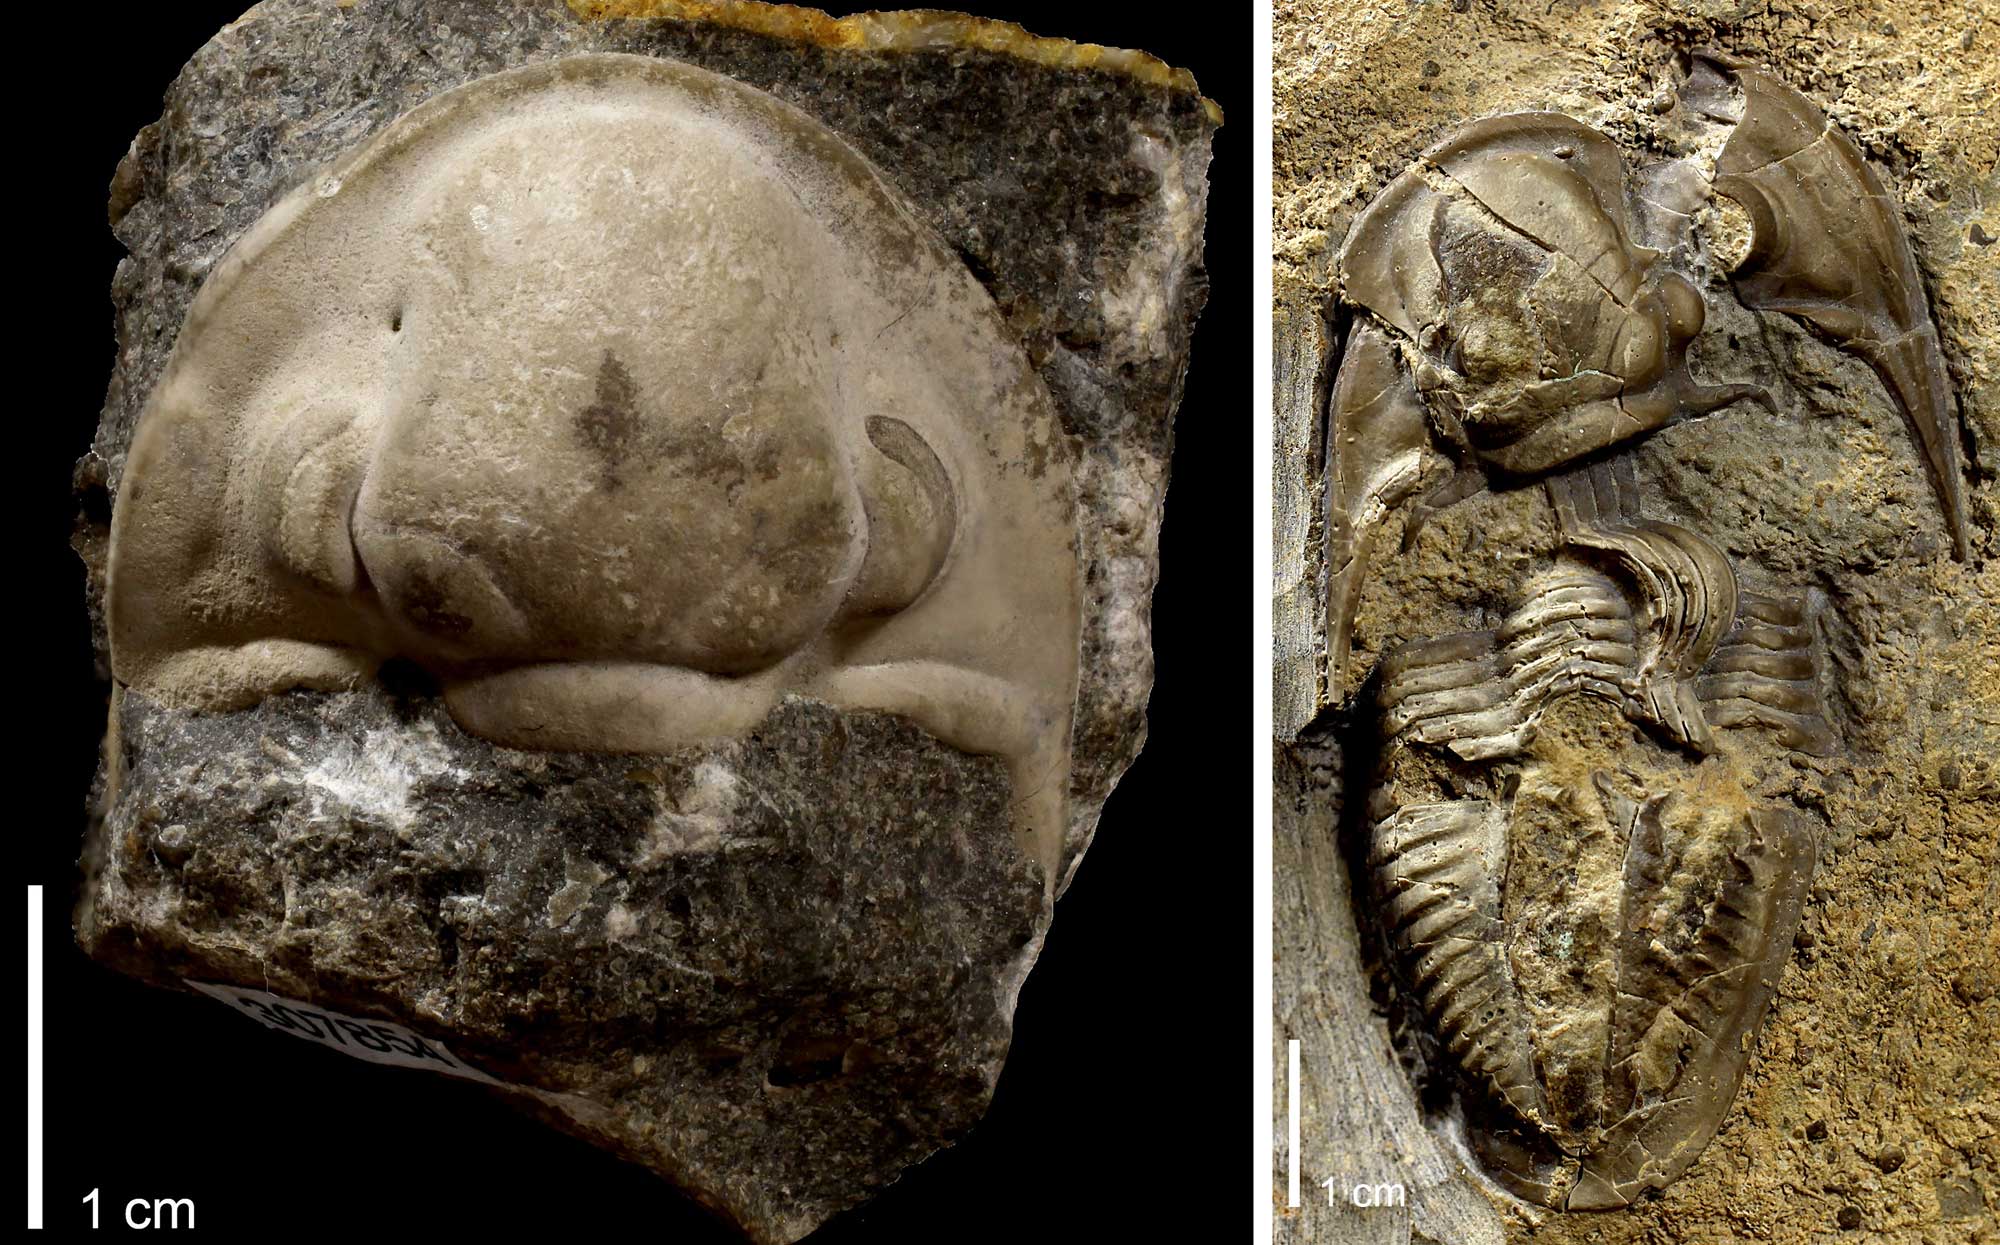 2-panel figure showing photos of trilobites from the Pennsylvanian of Oklahoma. Panel 1: Trilobite head. Panel 2: Complete trilobite with breaks in the head and body.